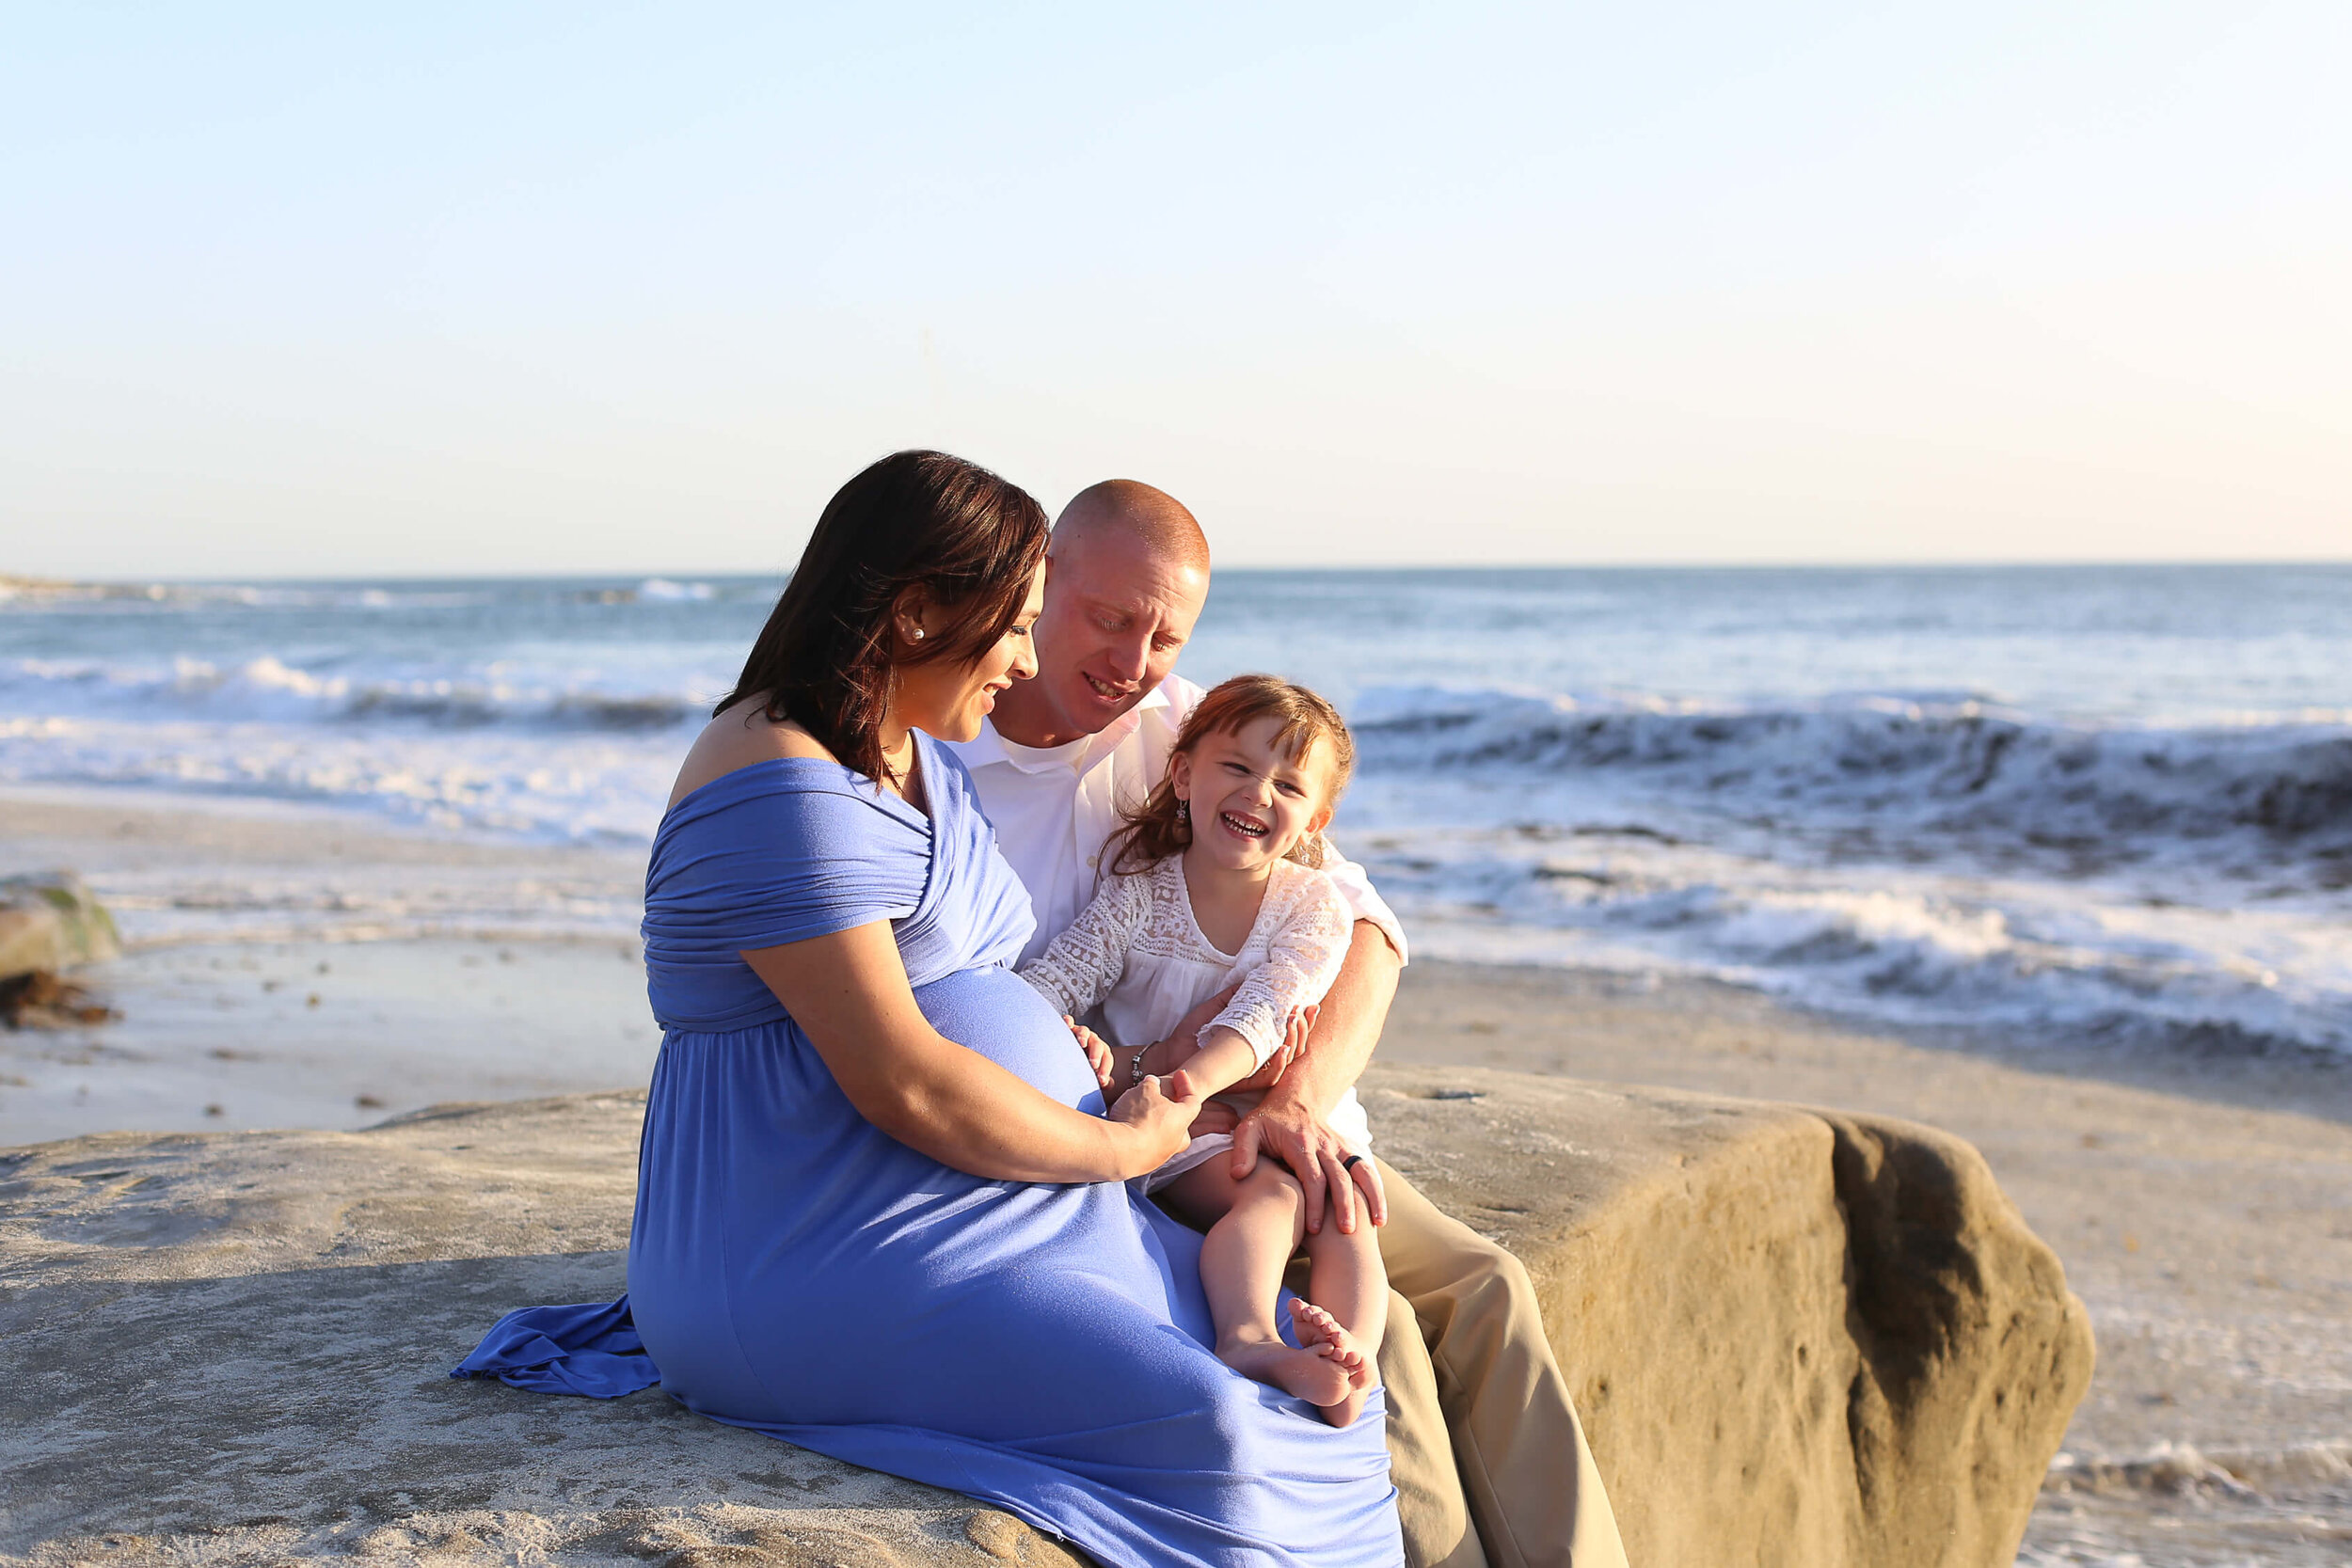  A photograph of a family sitting on some rocks together by the ocean, as the young daughter smiles and touches her mother’s baby bump by Photography by L Rose - San Diego California family photographer 